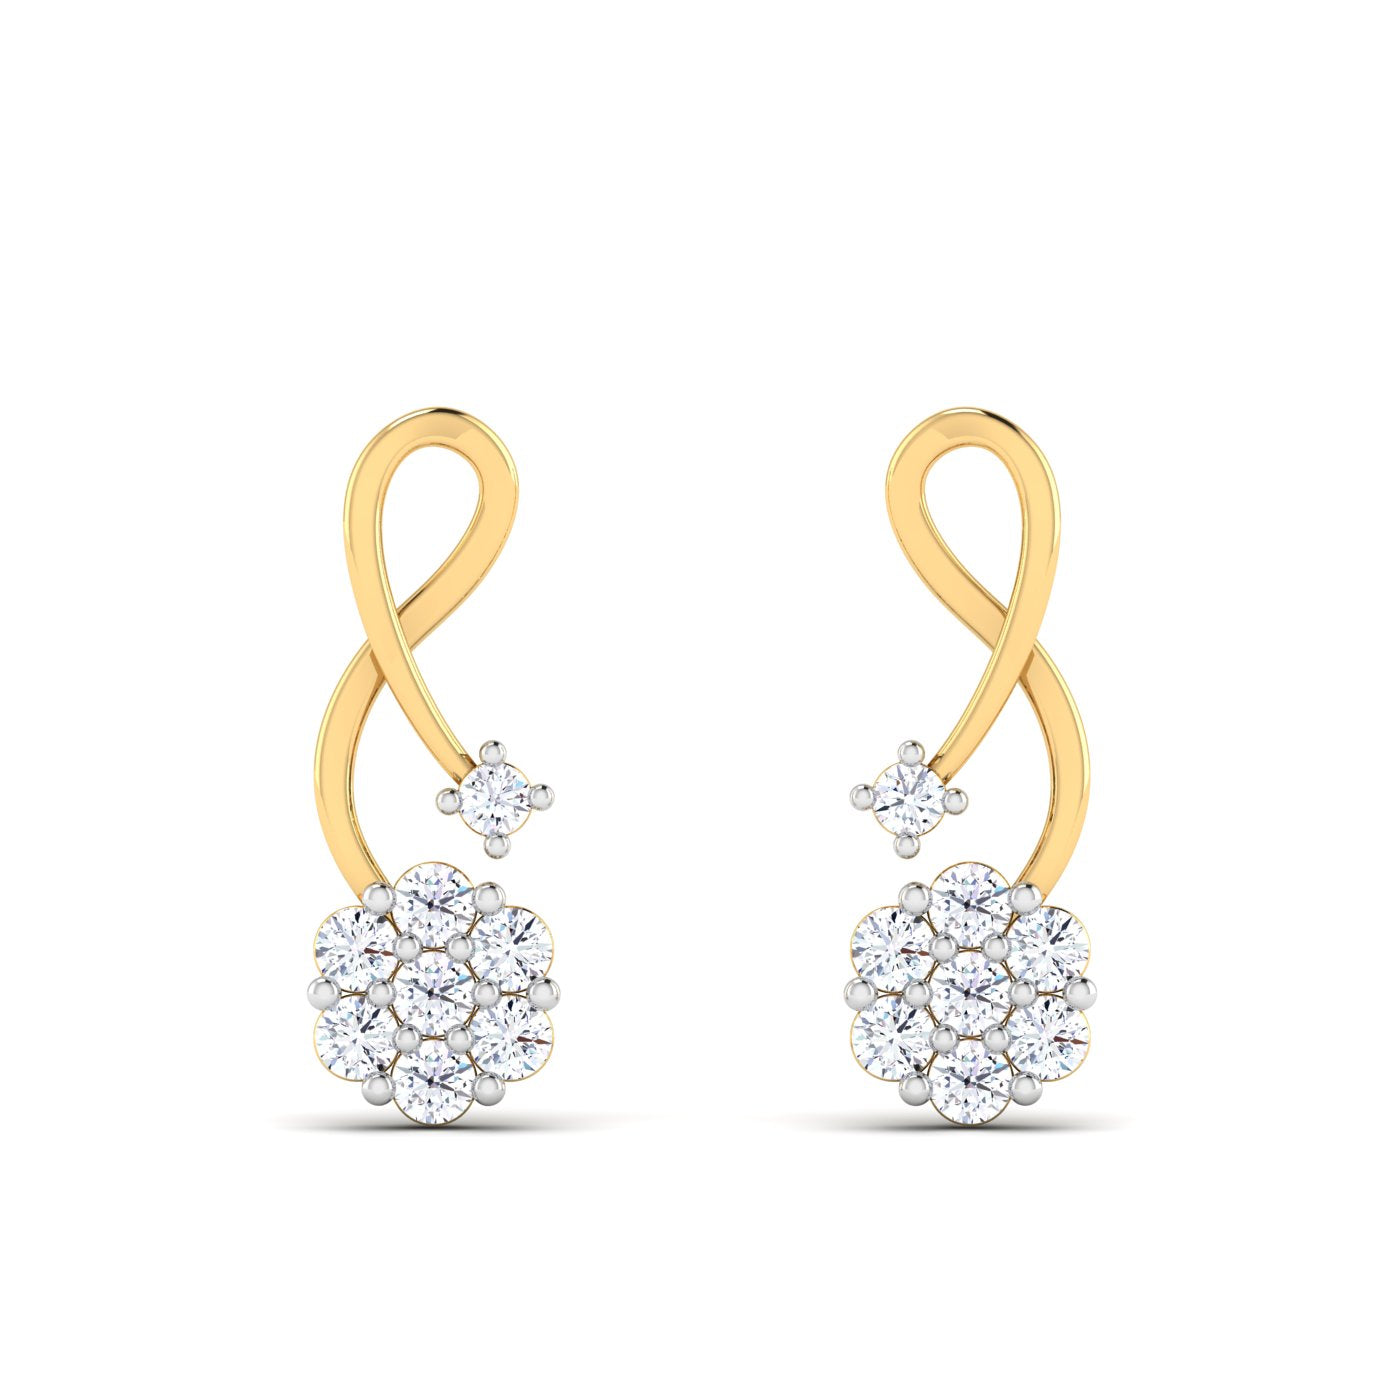 Floral buds Diamond Earring